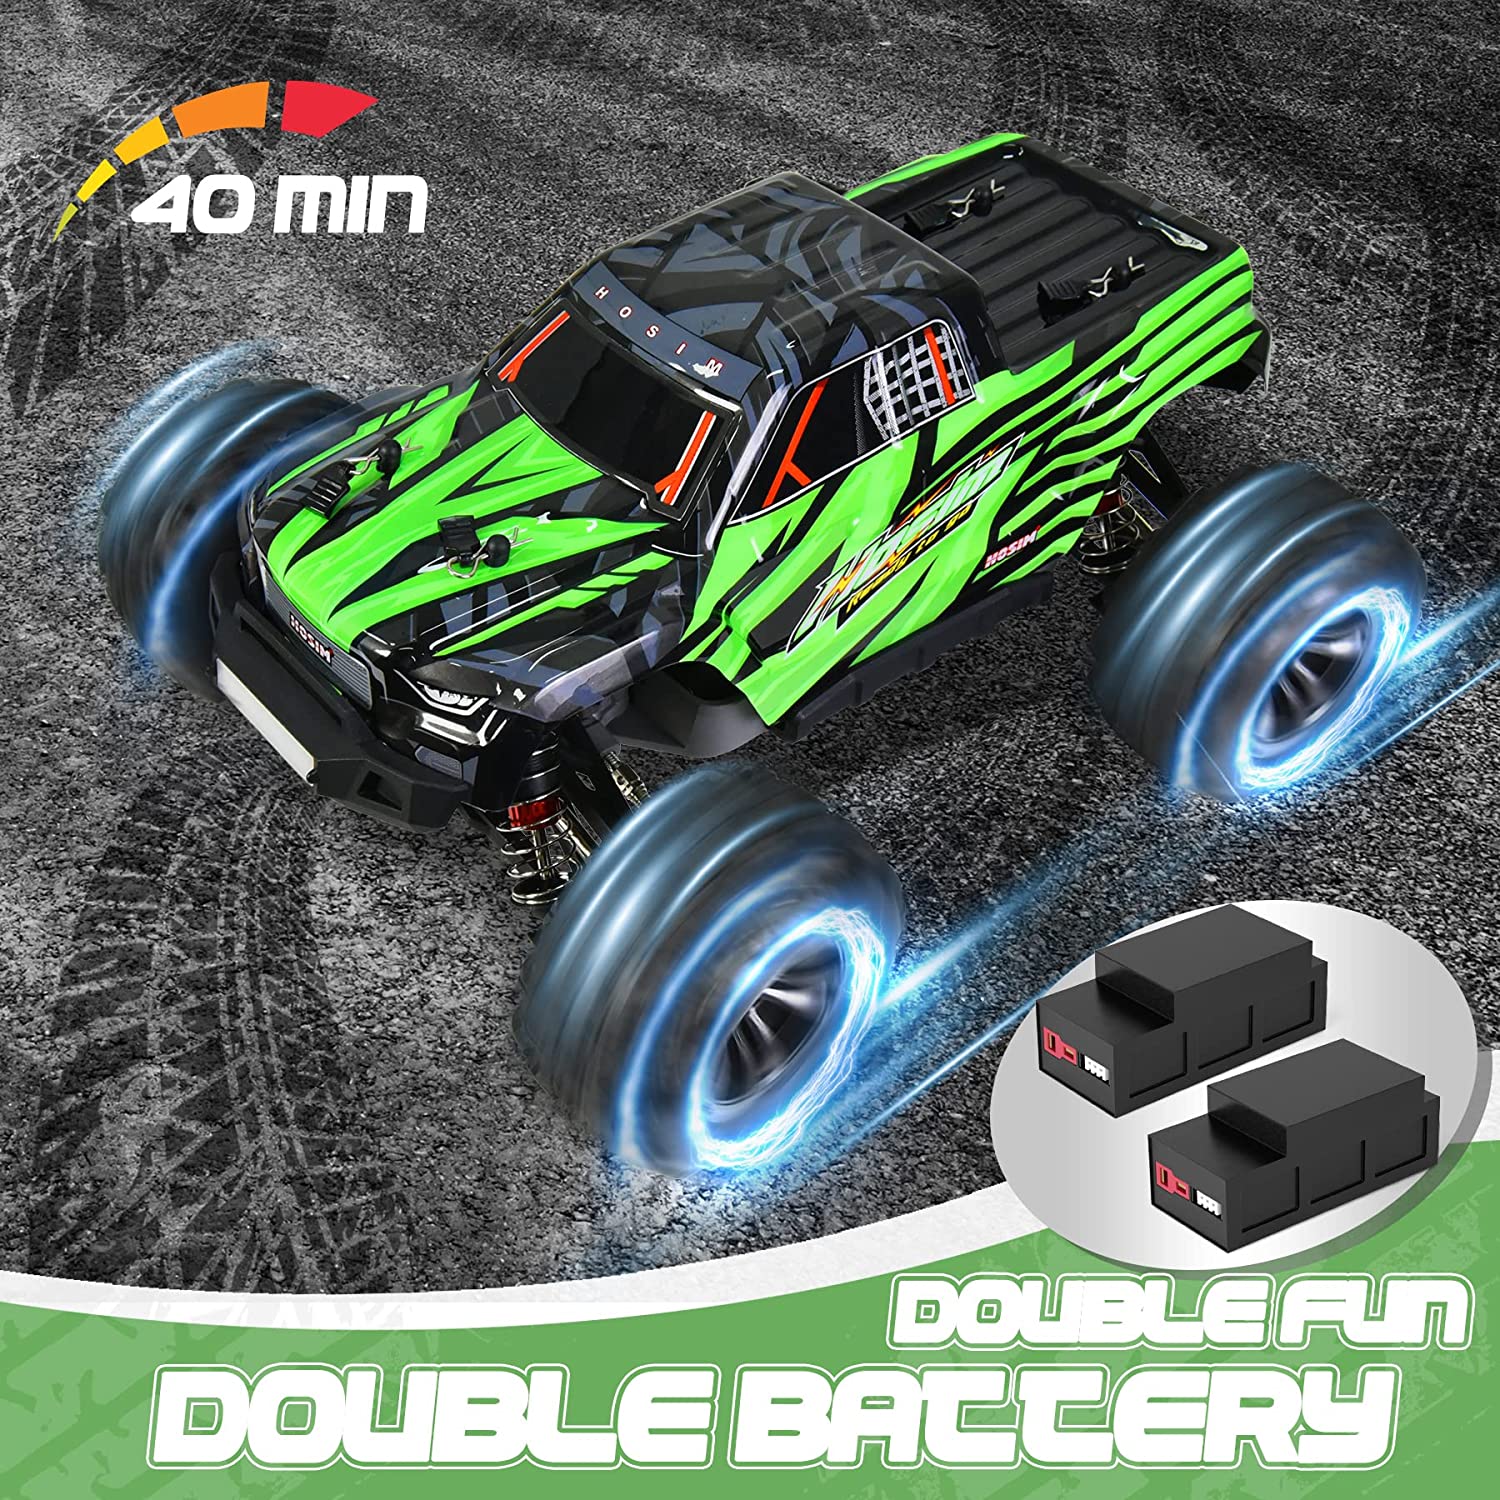 Hosim 1:16 Brushless RC Car 60+KMH 4WD Waterproof Fast Remote Control Truck Radio Cars Off-Road Hobby Grade Toy Crawler Electric Vehicle Gift for Boys Adult Children